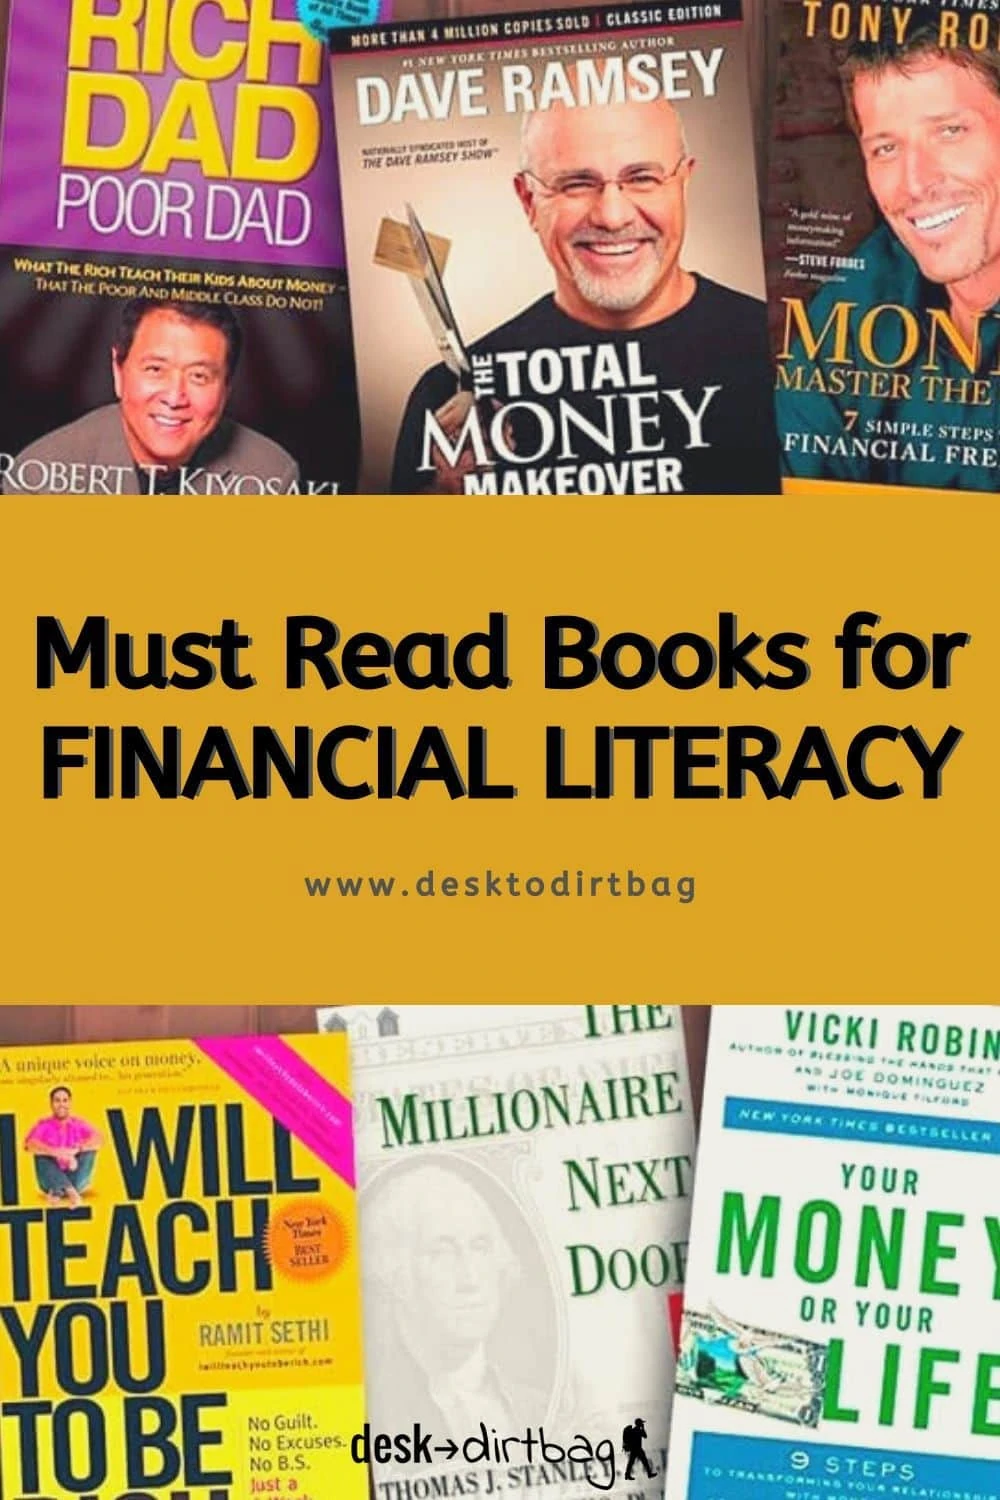 Take Control of Your Money: The Top Financial Literacy Books location-independence, budget-and-finance